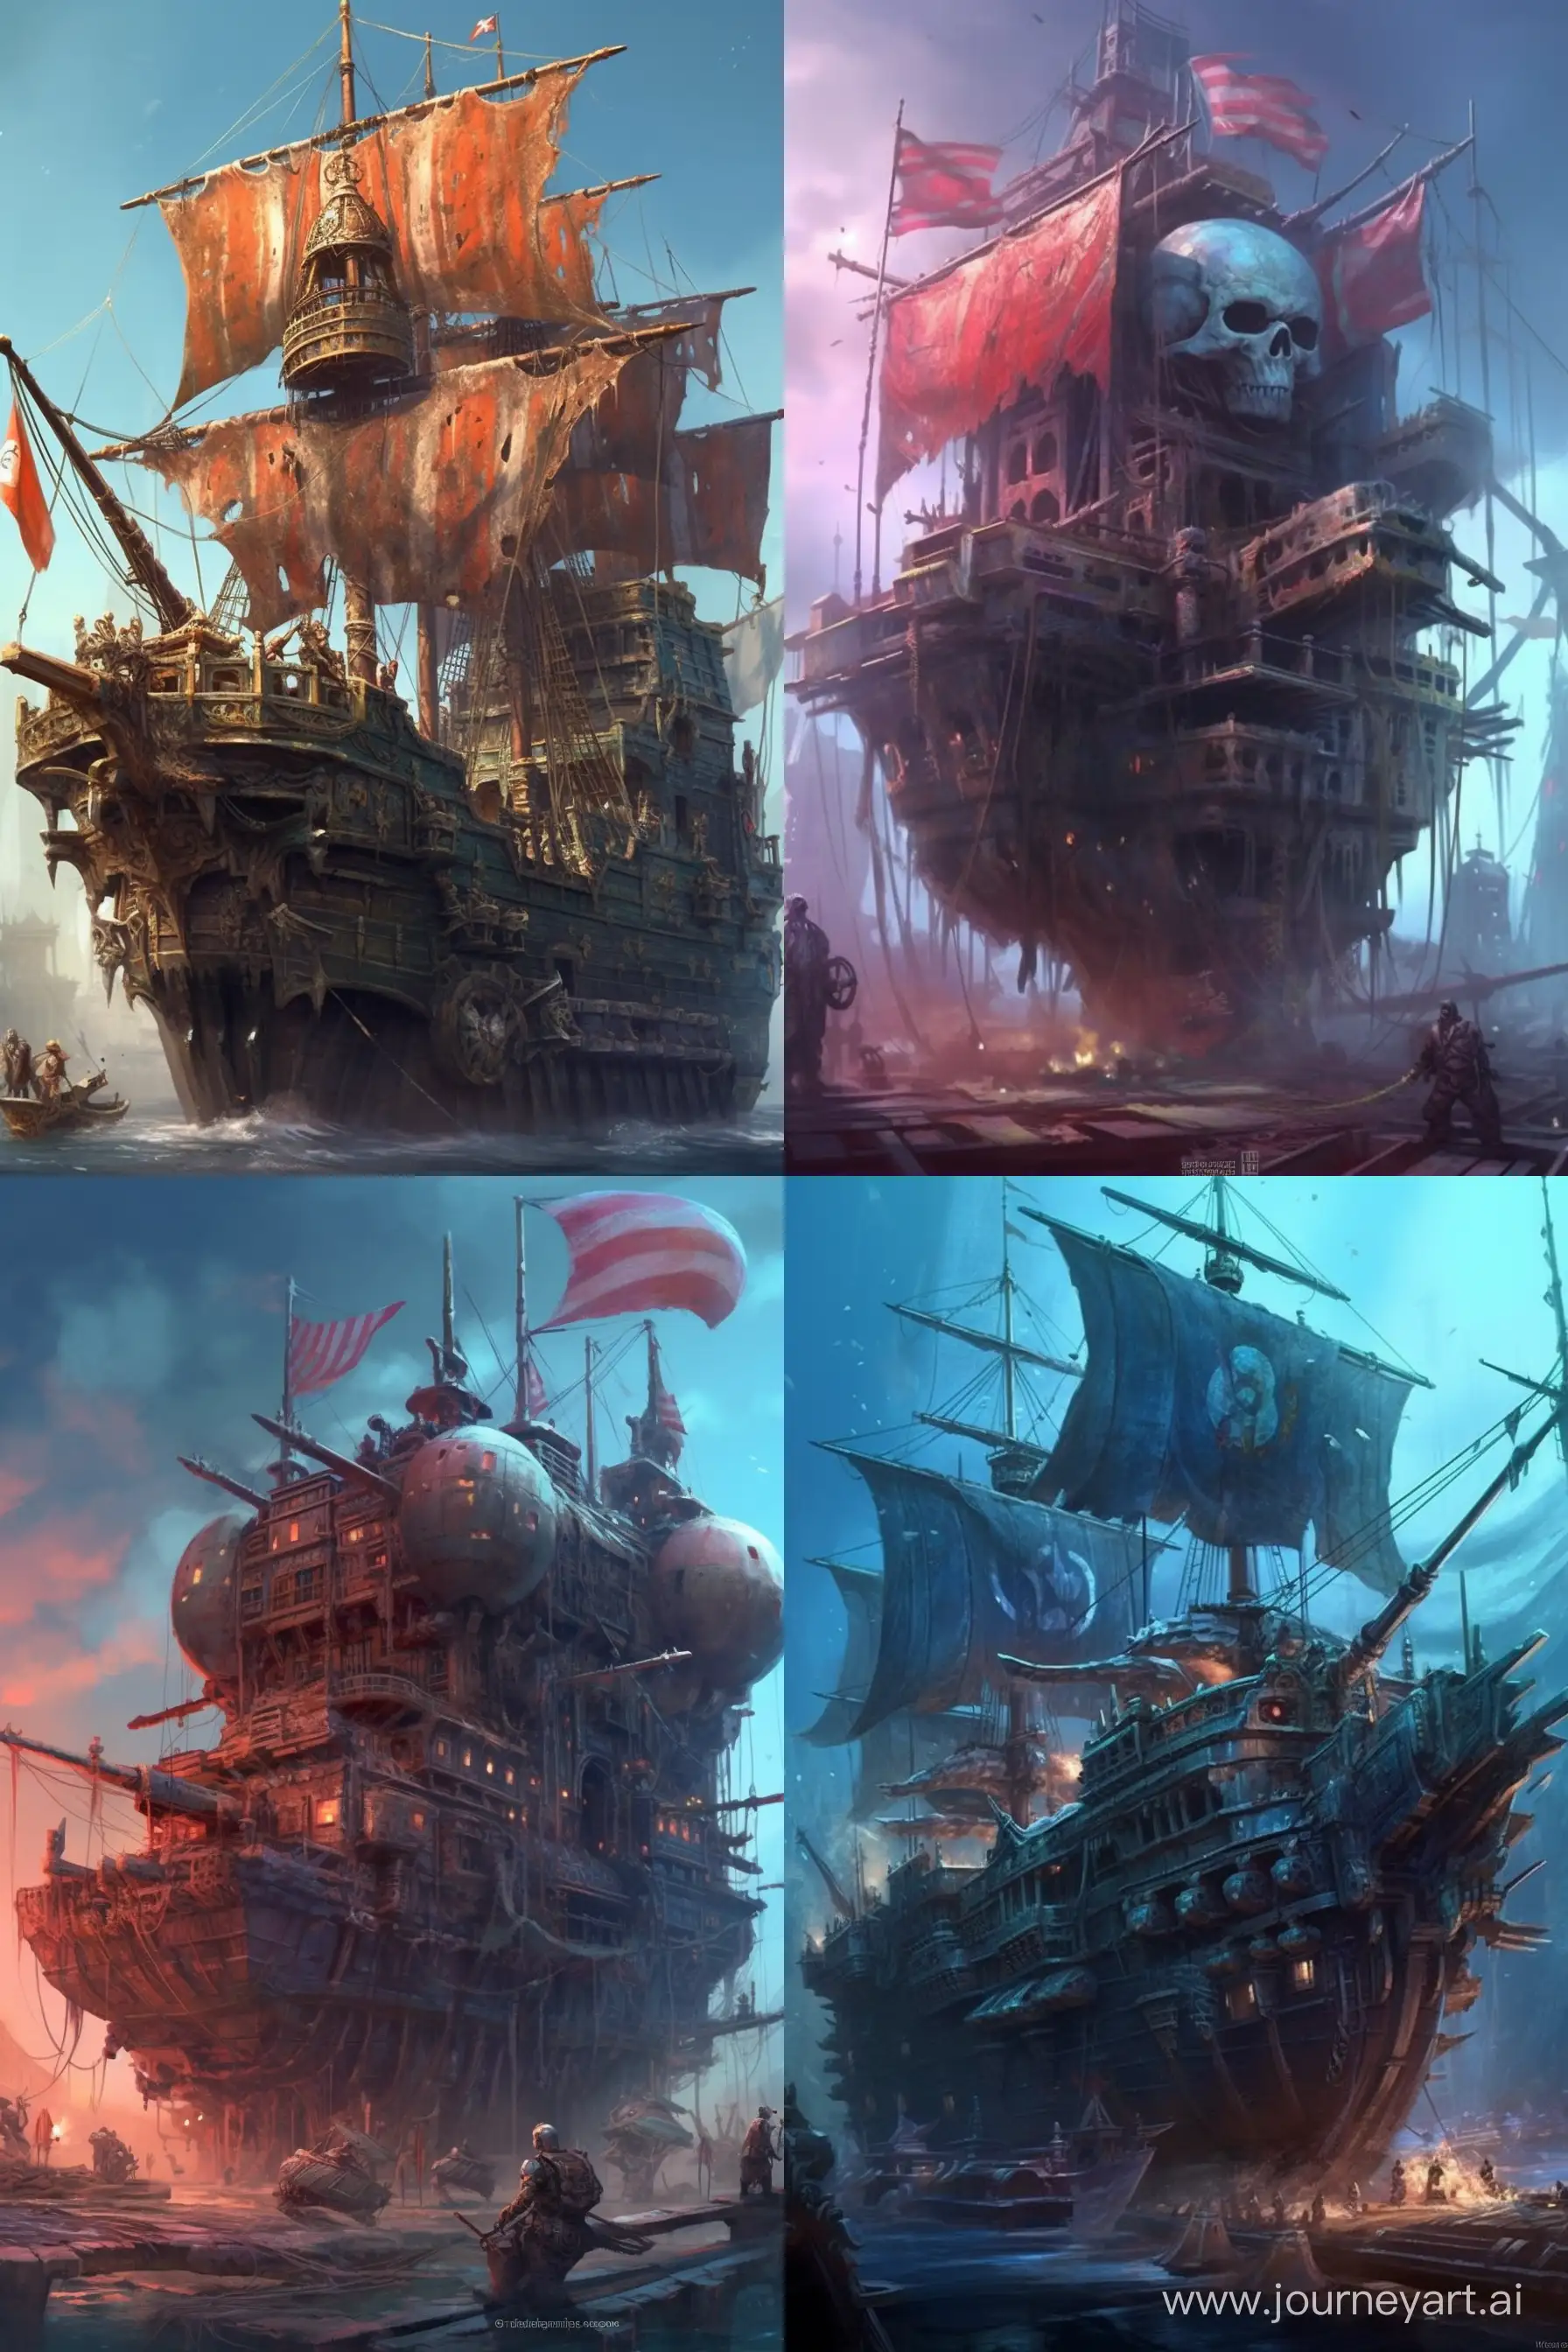 Exciting-Pirate-Ship-with-Skull-Flag-in-HighClarity-Cyberpunk-Style